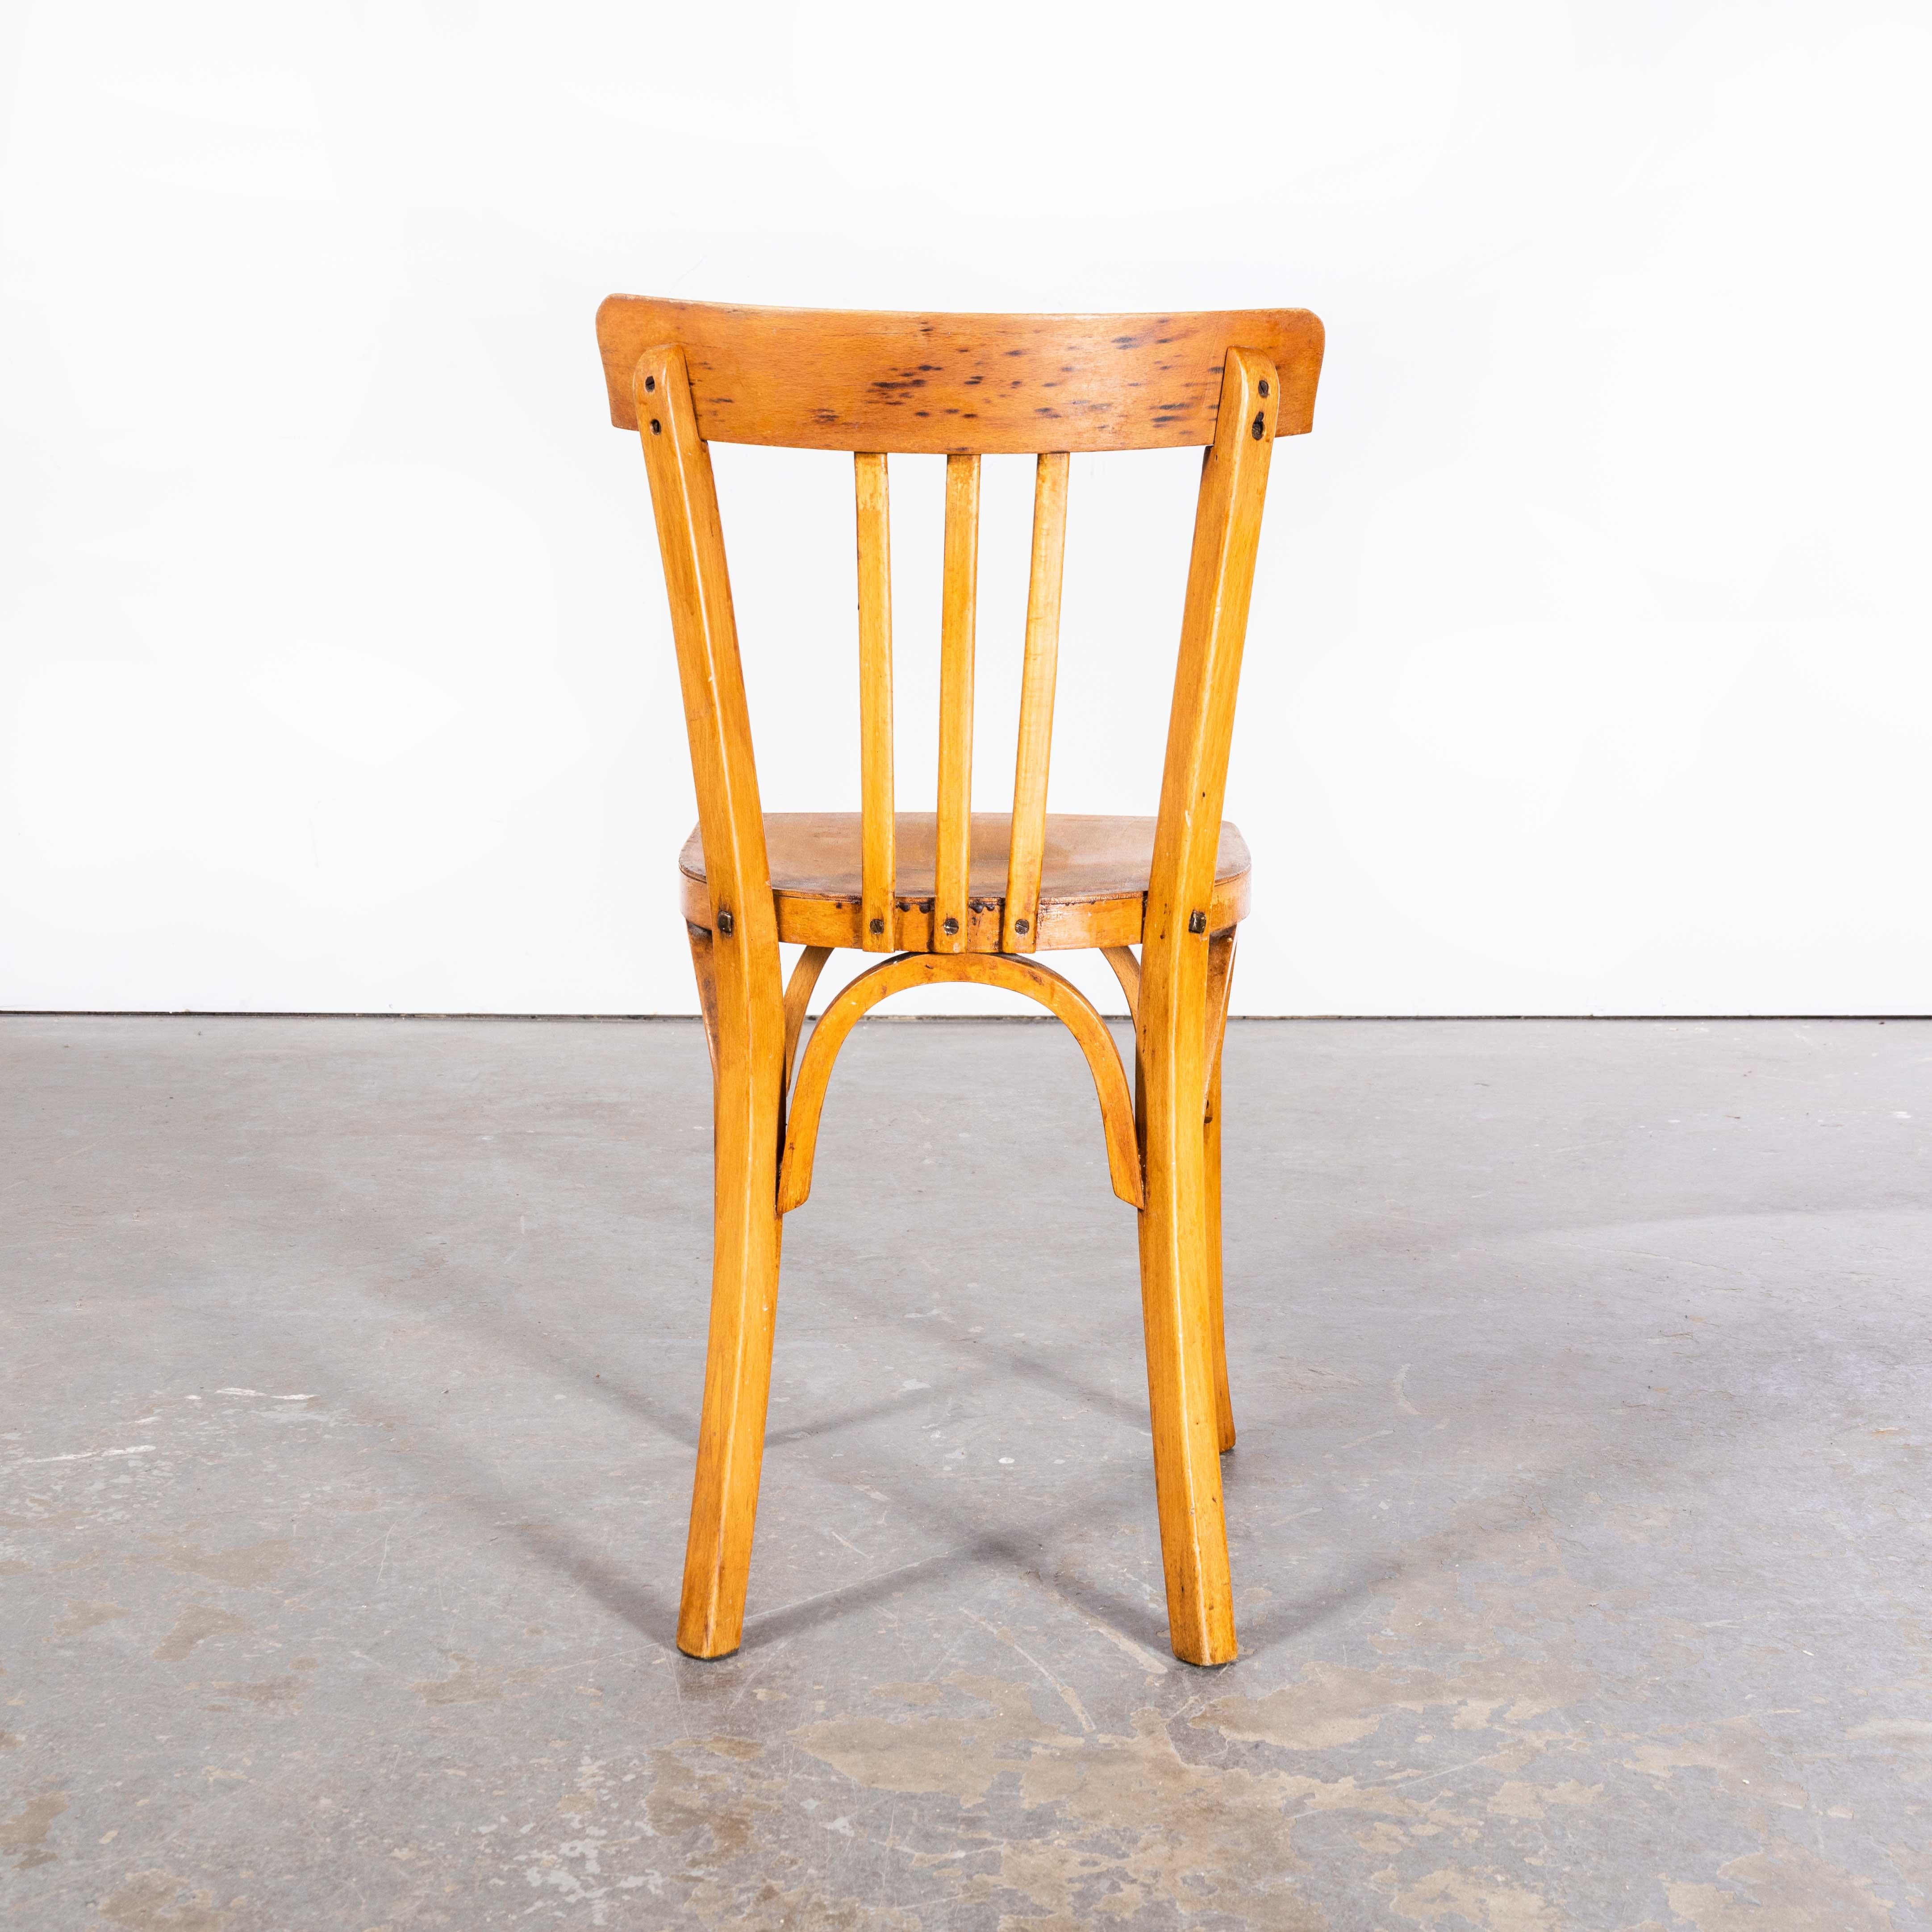 1950s Baumann Honey Tri Back Dining Chair – Set Of Four
1950s Baumann Honey Tri Back Dining Chair – Set Of Four. Classic beech bistro chair made in France by the maker Baumann. Baumann is a slightly off the radar French producer just starting to